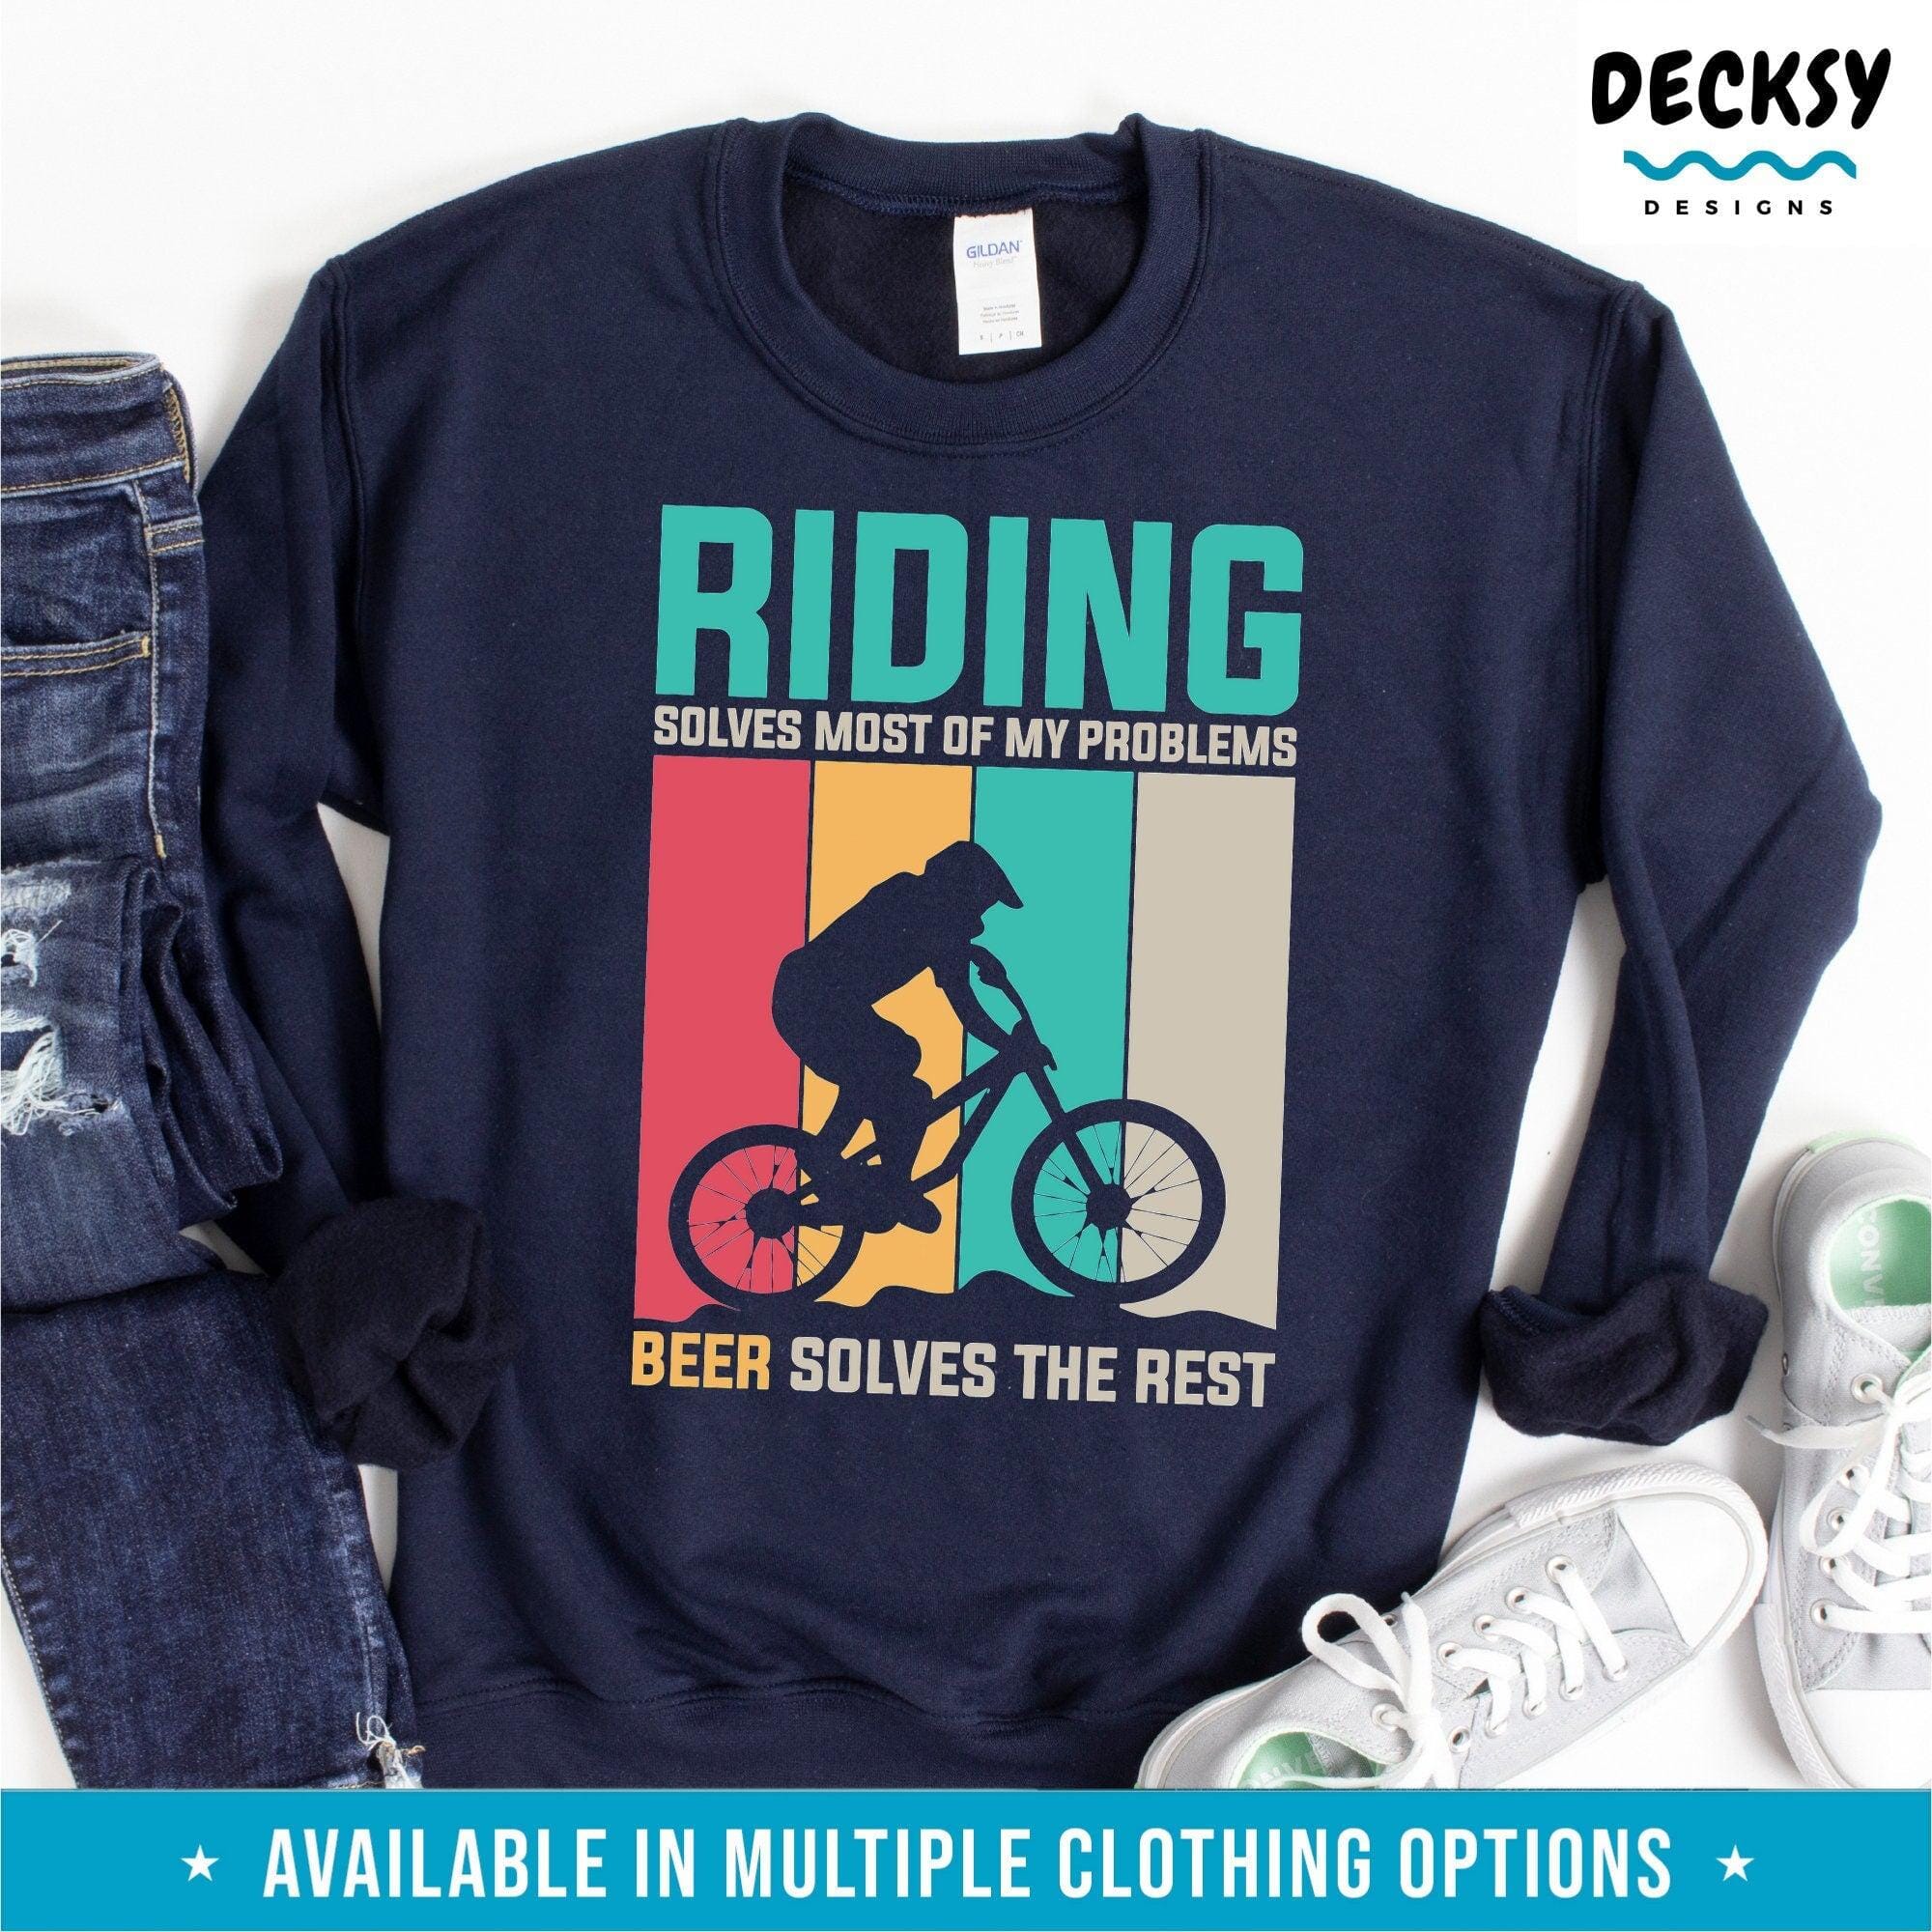 Cycling Shirt, Gift For Beer Lovers-Clothing:Gender-Neutral Adult Clothing:Tops & Tees:T-shirts:Graphic Tees-DecksyDesigns